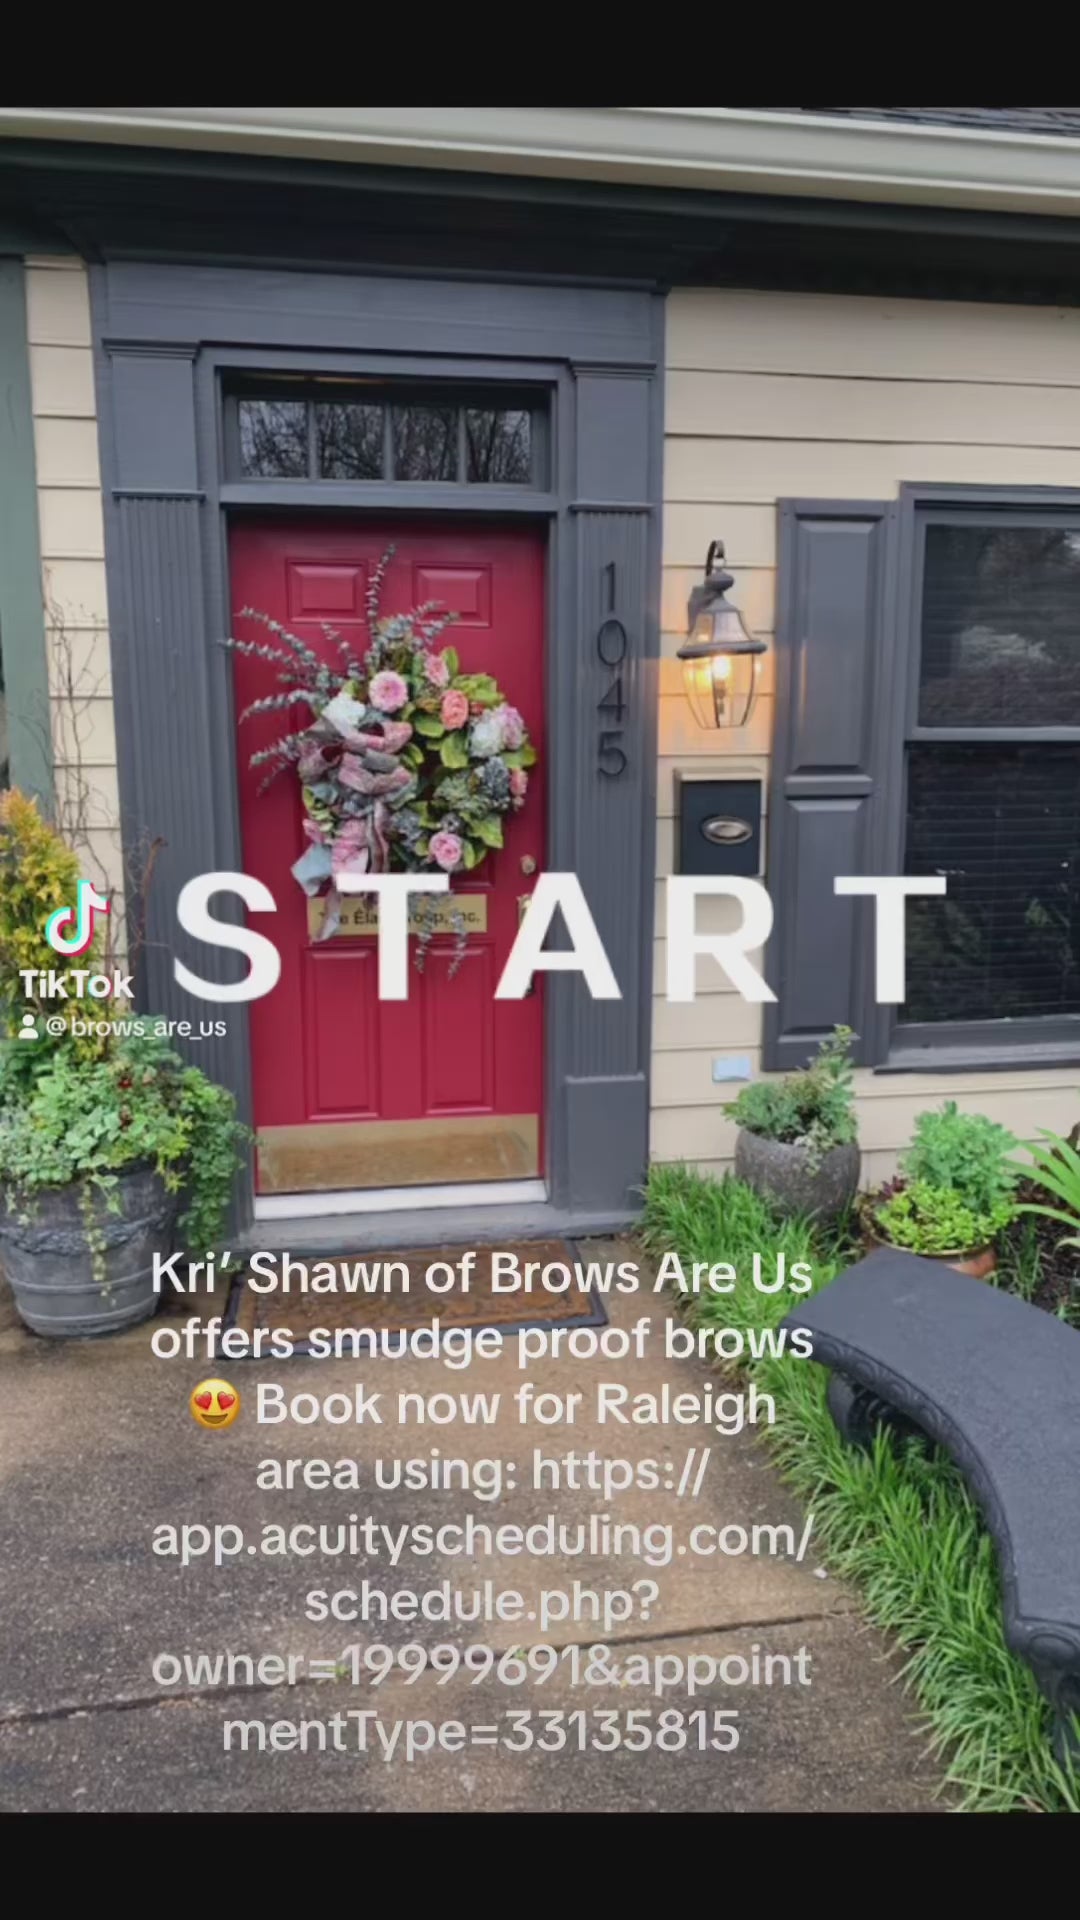 Raleigh's Hottest Microblading: Get Perfect Brows with Brows Are Us Microblading